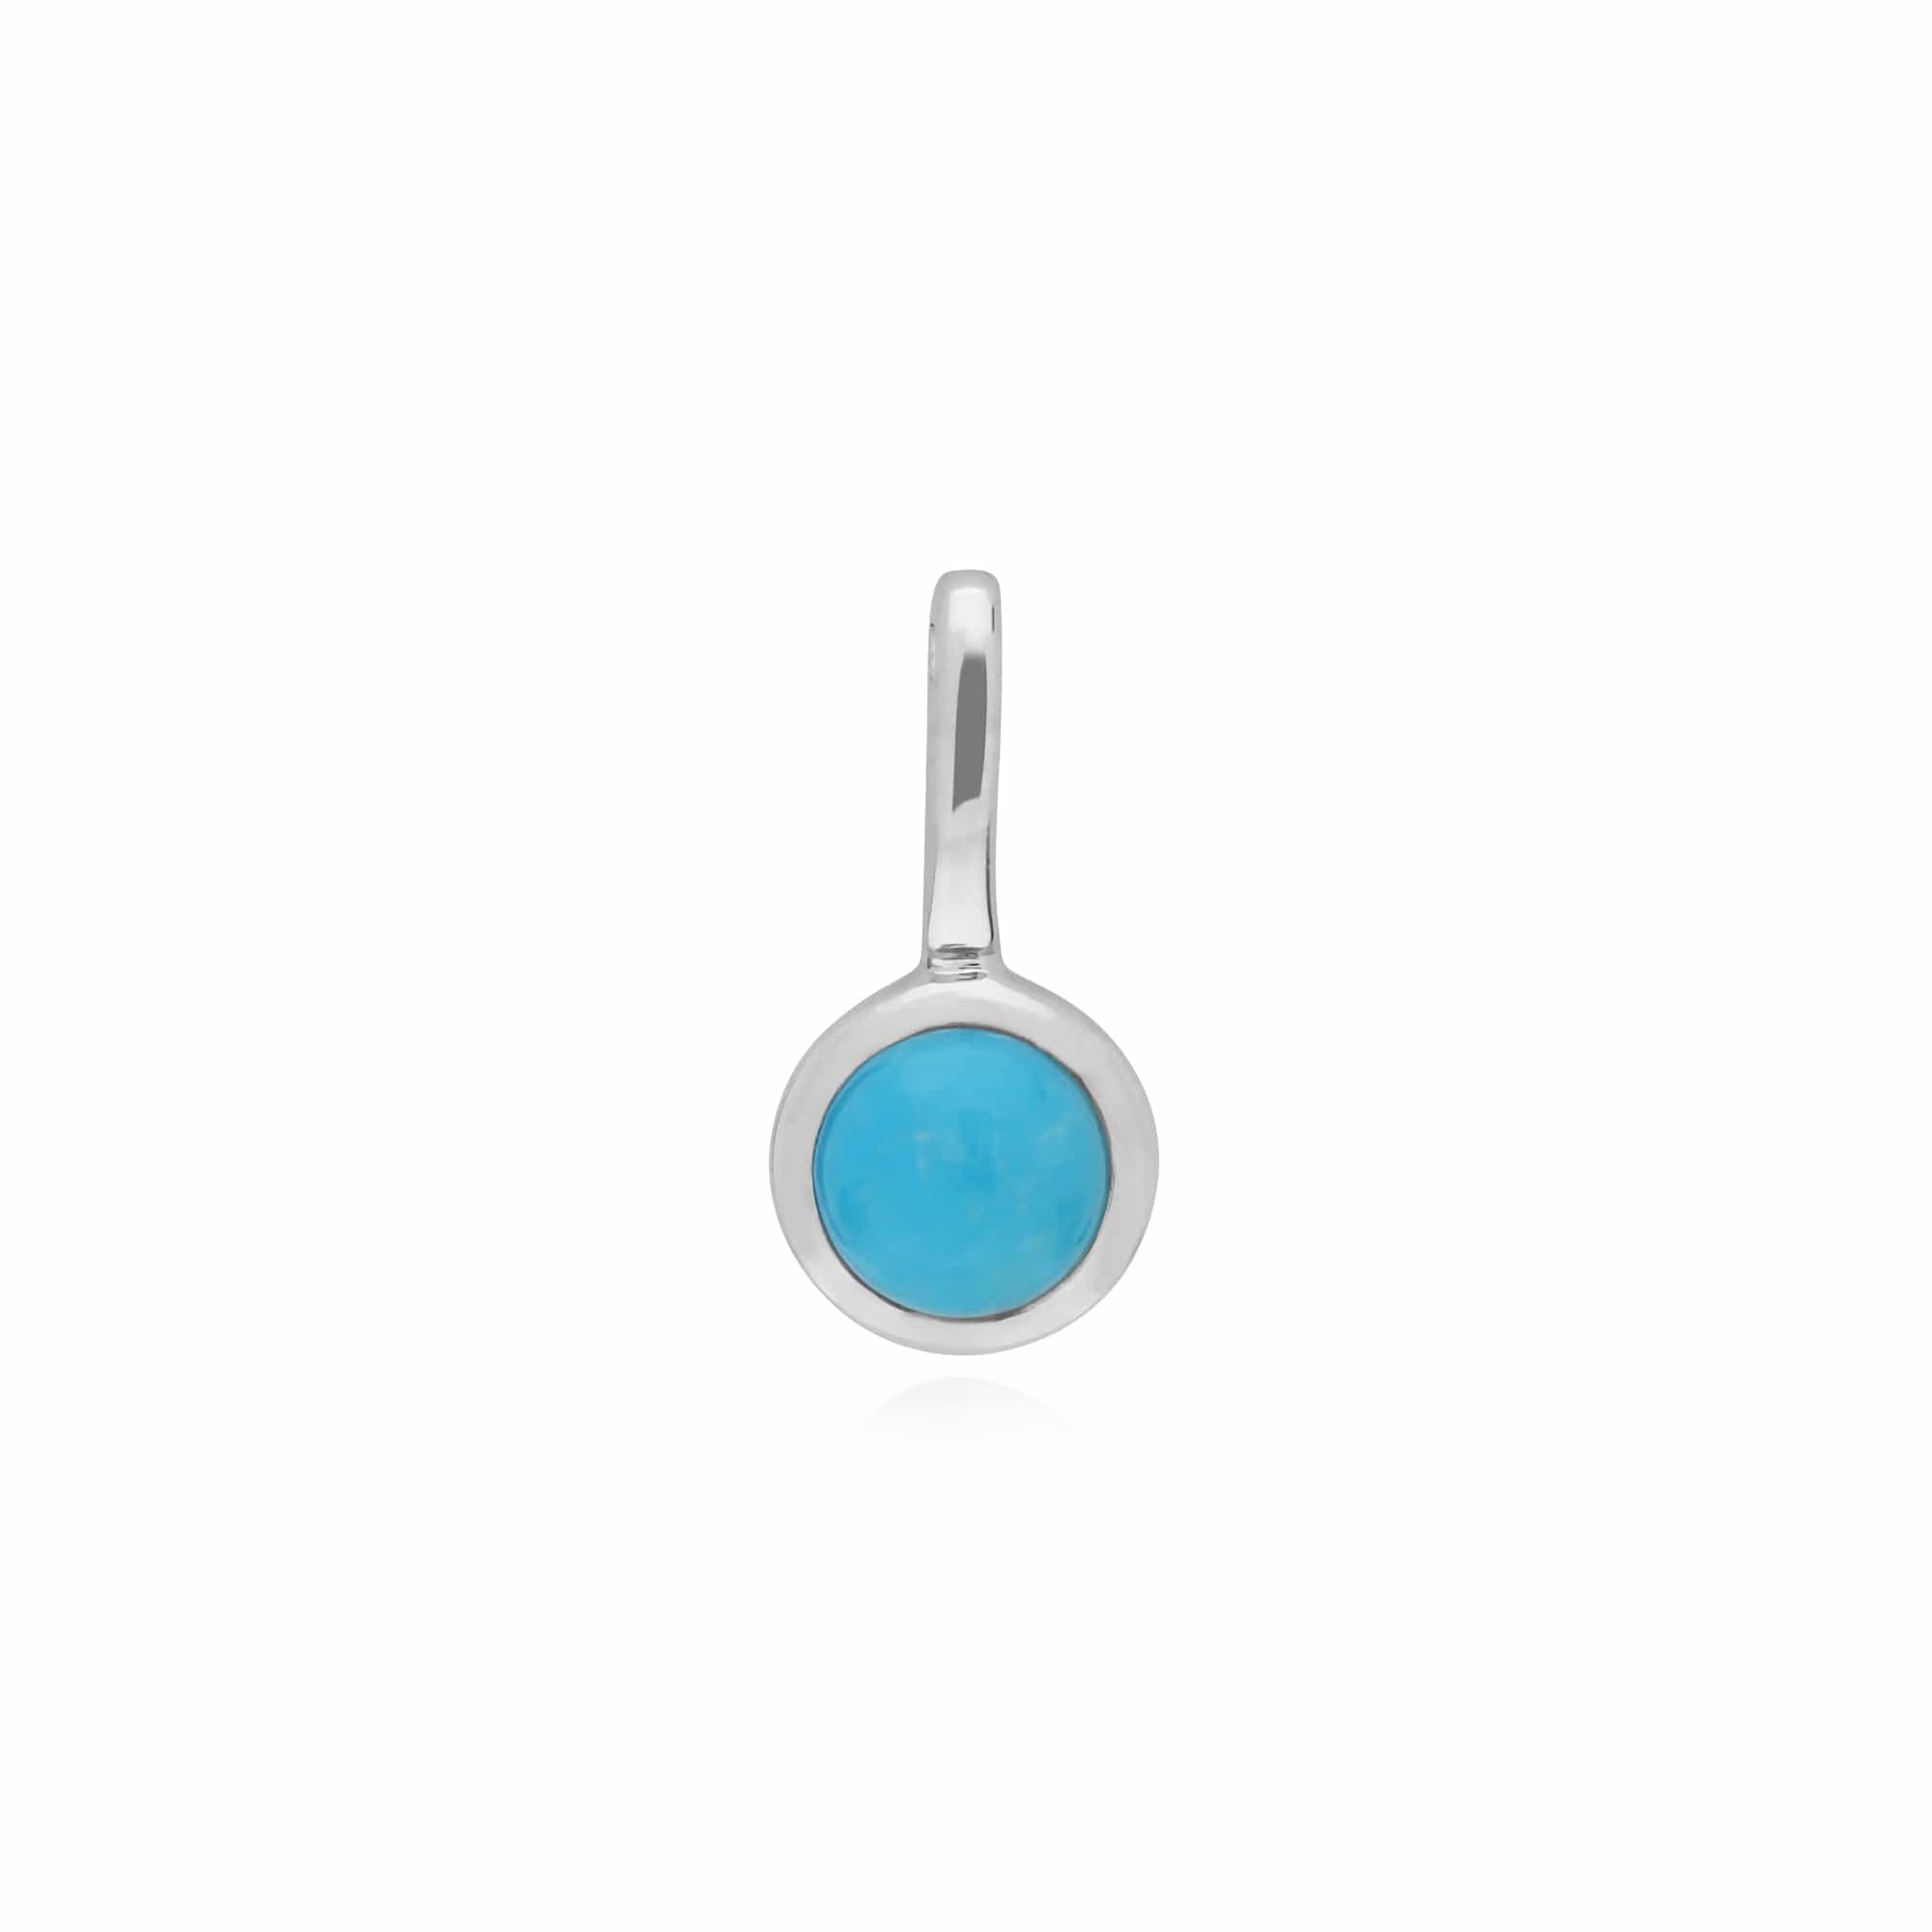 270P026001925-270P026601925 Classic Swirl Heart Lock Pendant & Turquoise Charm in 925 Sterling Silver 2